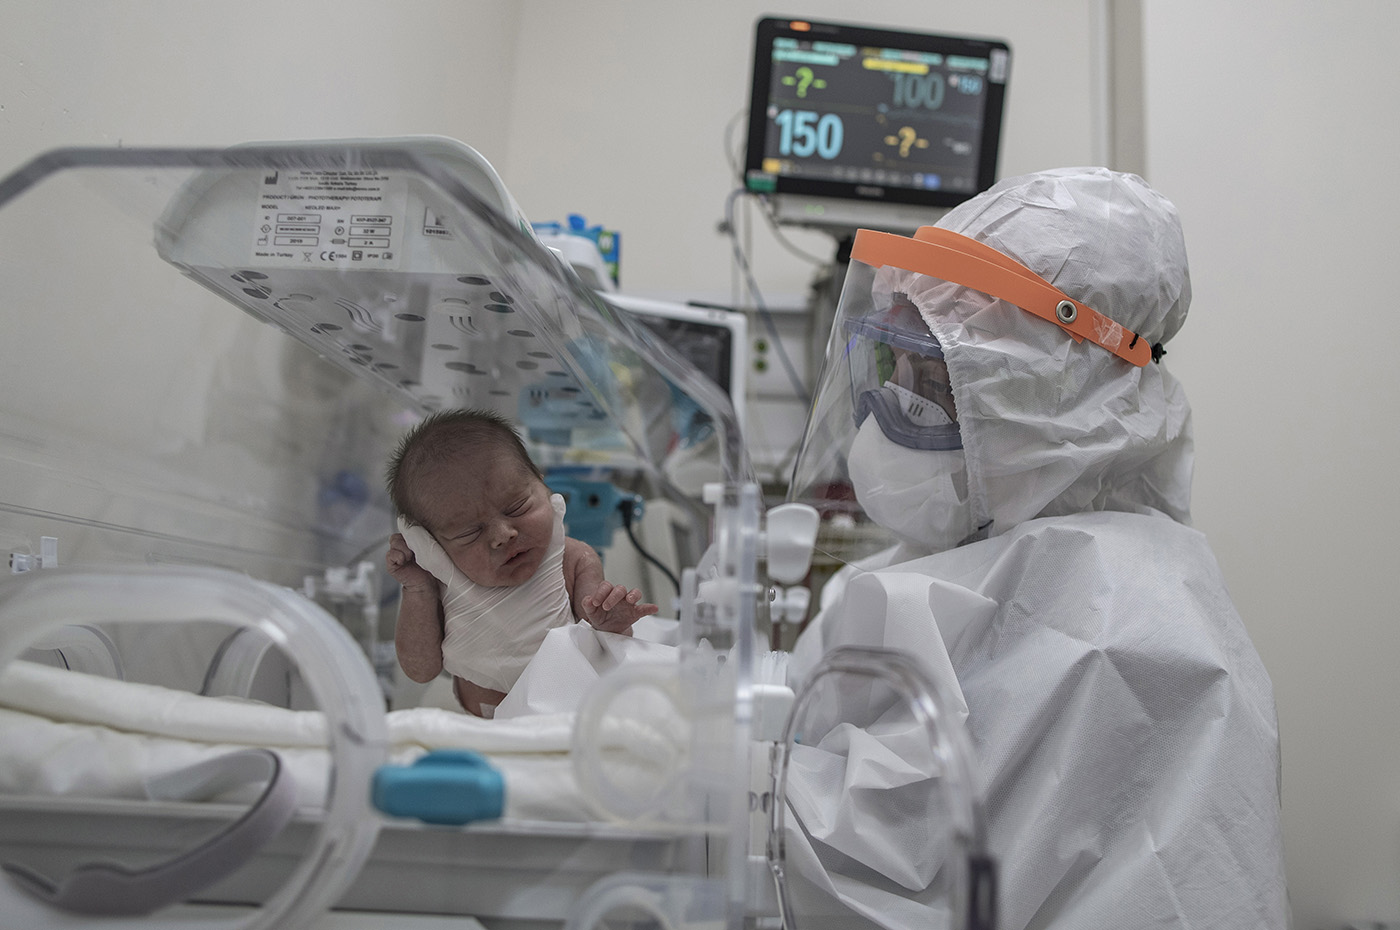 A medical worker wearing Personal Protective Equipment (PPE) feeds to a new born baby from a positive COVID-19 mother at the Sancaktepe Martyr Prof Dr Ilhan Varank Training and Research Hospital in Istanbul, Turkey, 11 May 2020. 60.000 people have applied with suspicion of COVID-19 until 11 May 2020 to Sancaktepe hospital. 12.000 of these tested and 2500 treated. Hospital mortality rate is below 1%.